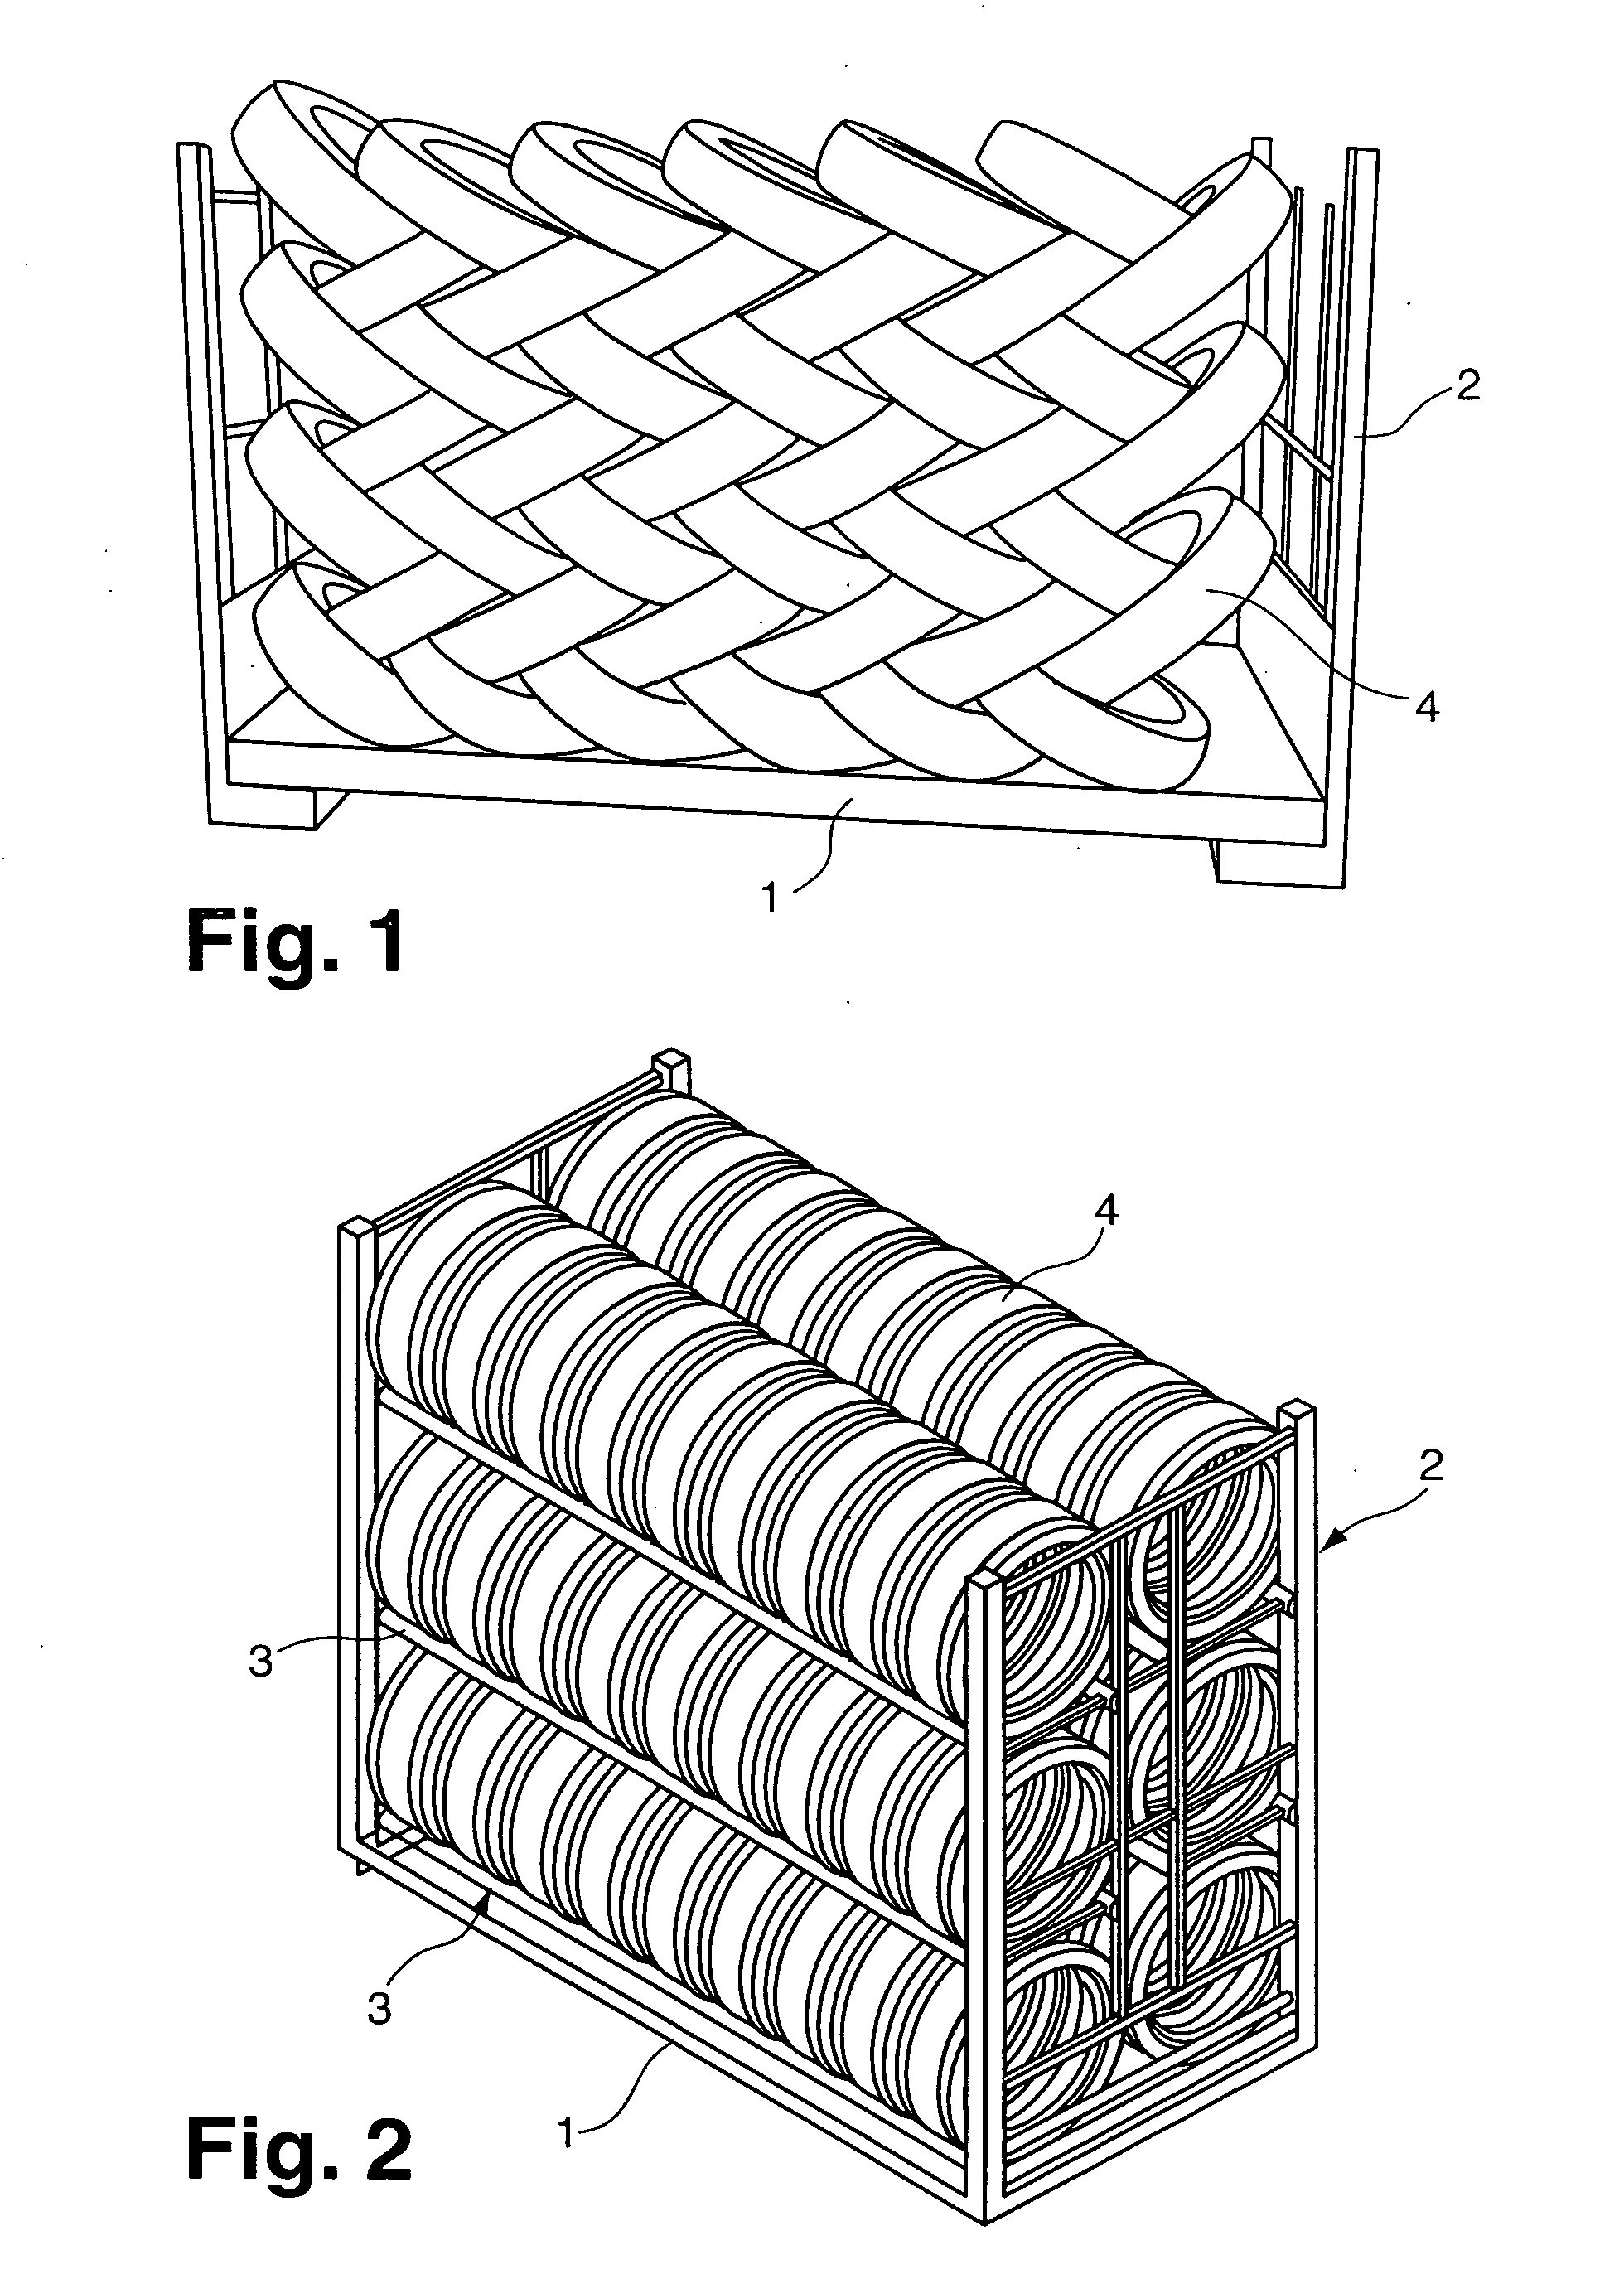 Method and Device for Automatically Stacking Tires on a Support